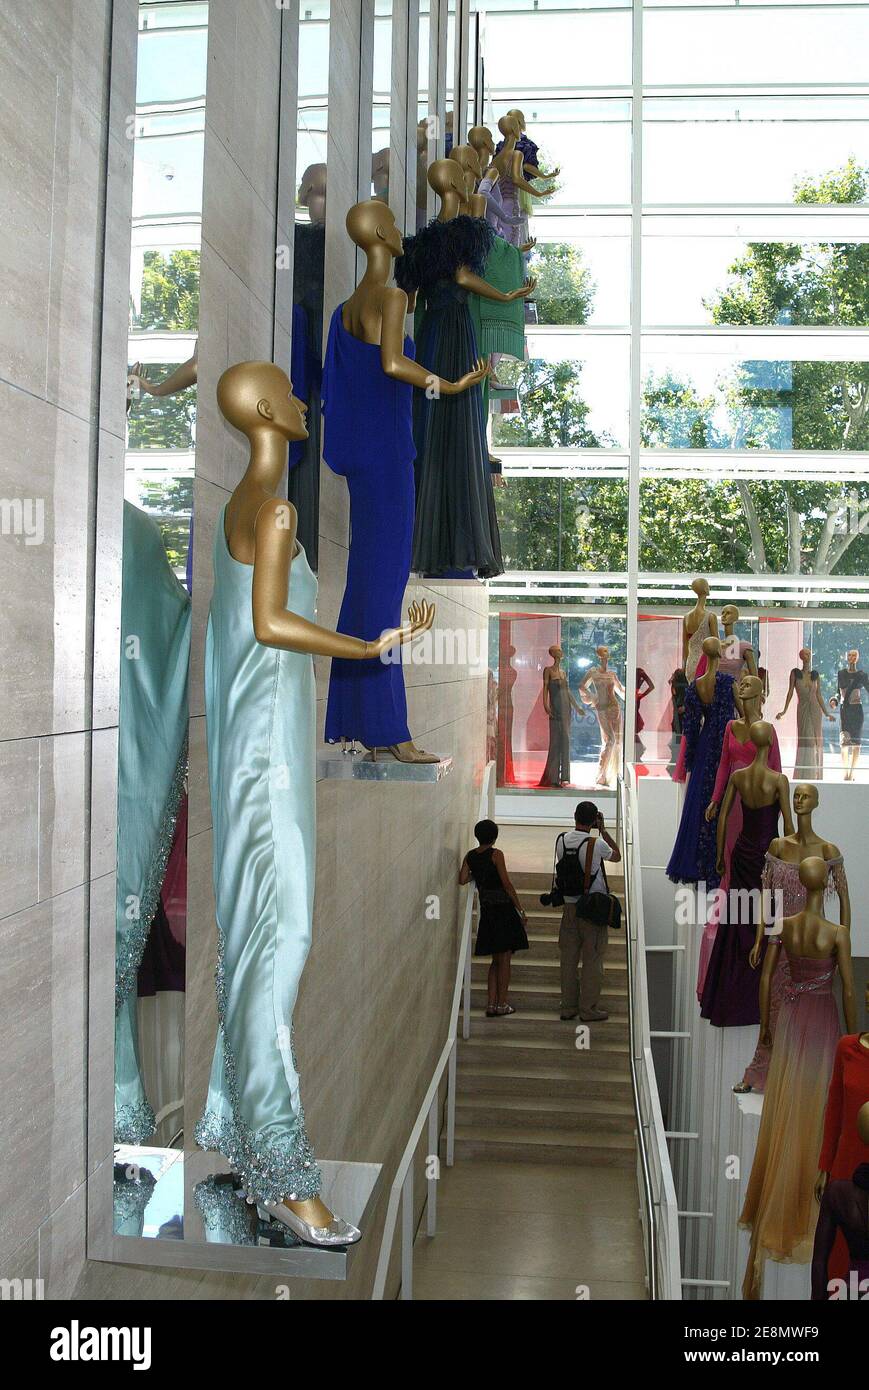 Valentino creations are displayed at the Valentino's 45 Years of Fashion  exhibition celebrating the 45th Anniversary of the Valentino fashion house,  at the Ara Pacis Museum in Rome, Italy on July 6,